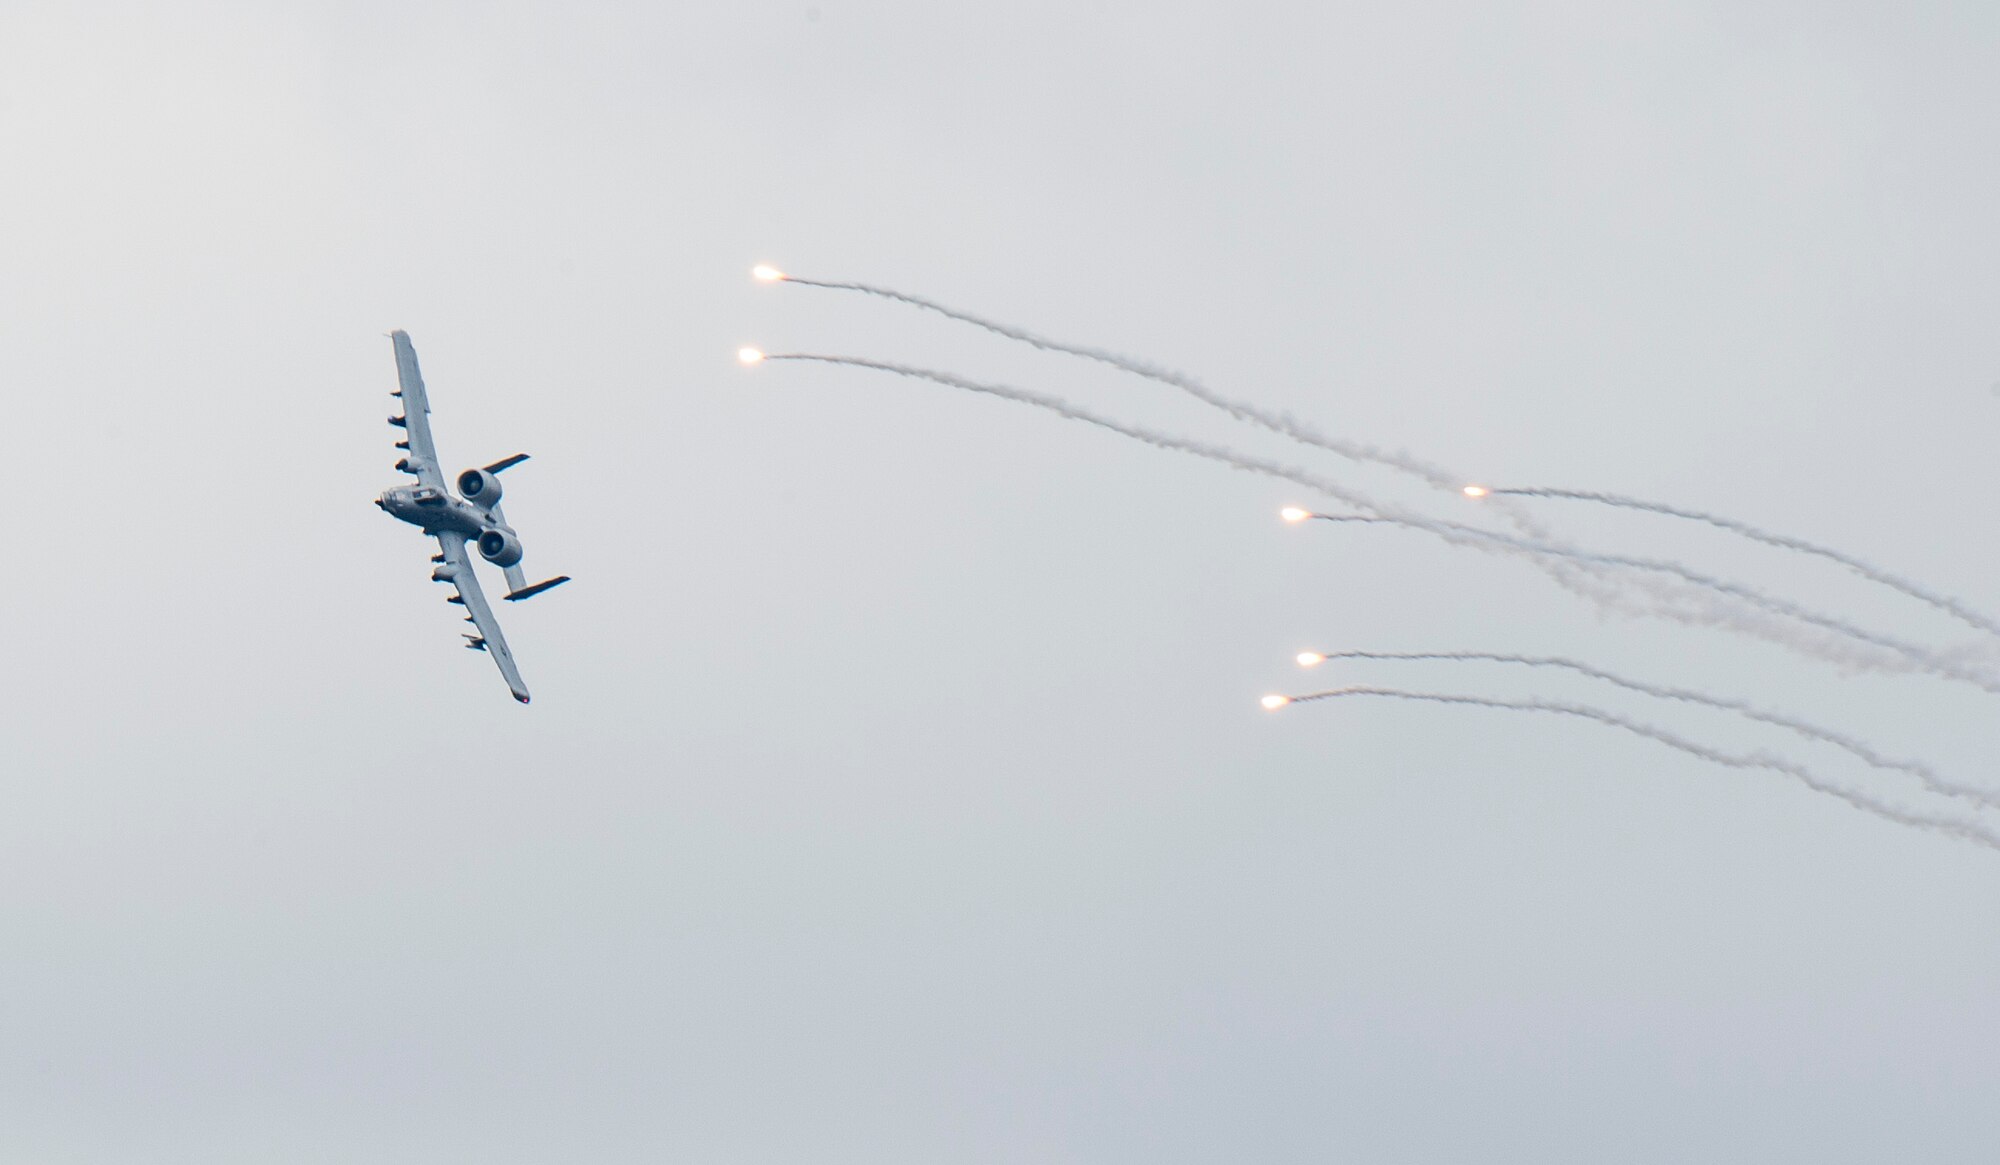 An A-10 Thunderbolt II releases flares over Grand Bay Bombing and Gunnery Range at Moody Air Force Base, Ga., Feb. 18, 2016. Multiple U.S. Air Force aircraft within Air Combat Command conducted joint aerial training that showcased the aircrafts tactical air and ground maneuvers, as well as its weapons capabilities. (U.S. Air Force photo by Staff Sgt. Brian J. Valencia/Released)